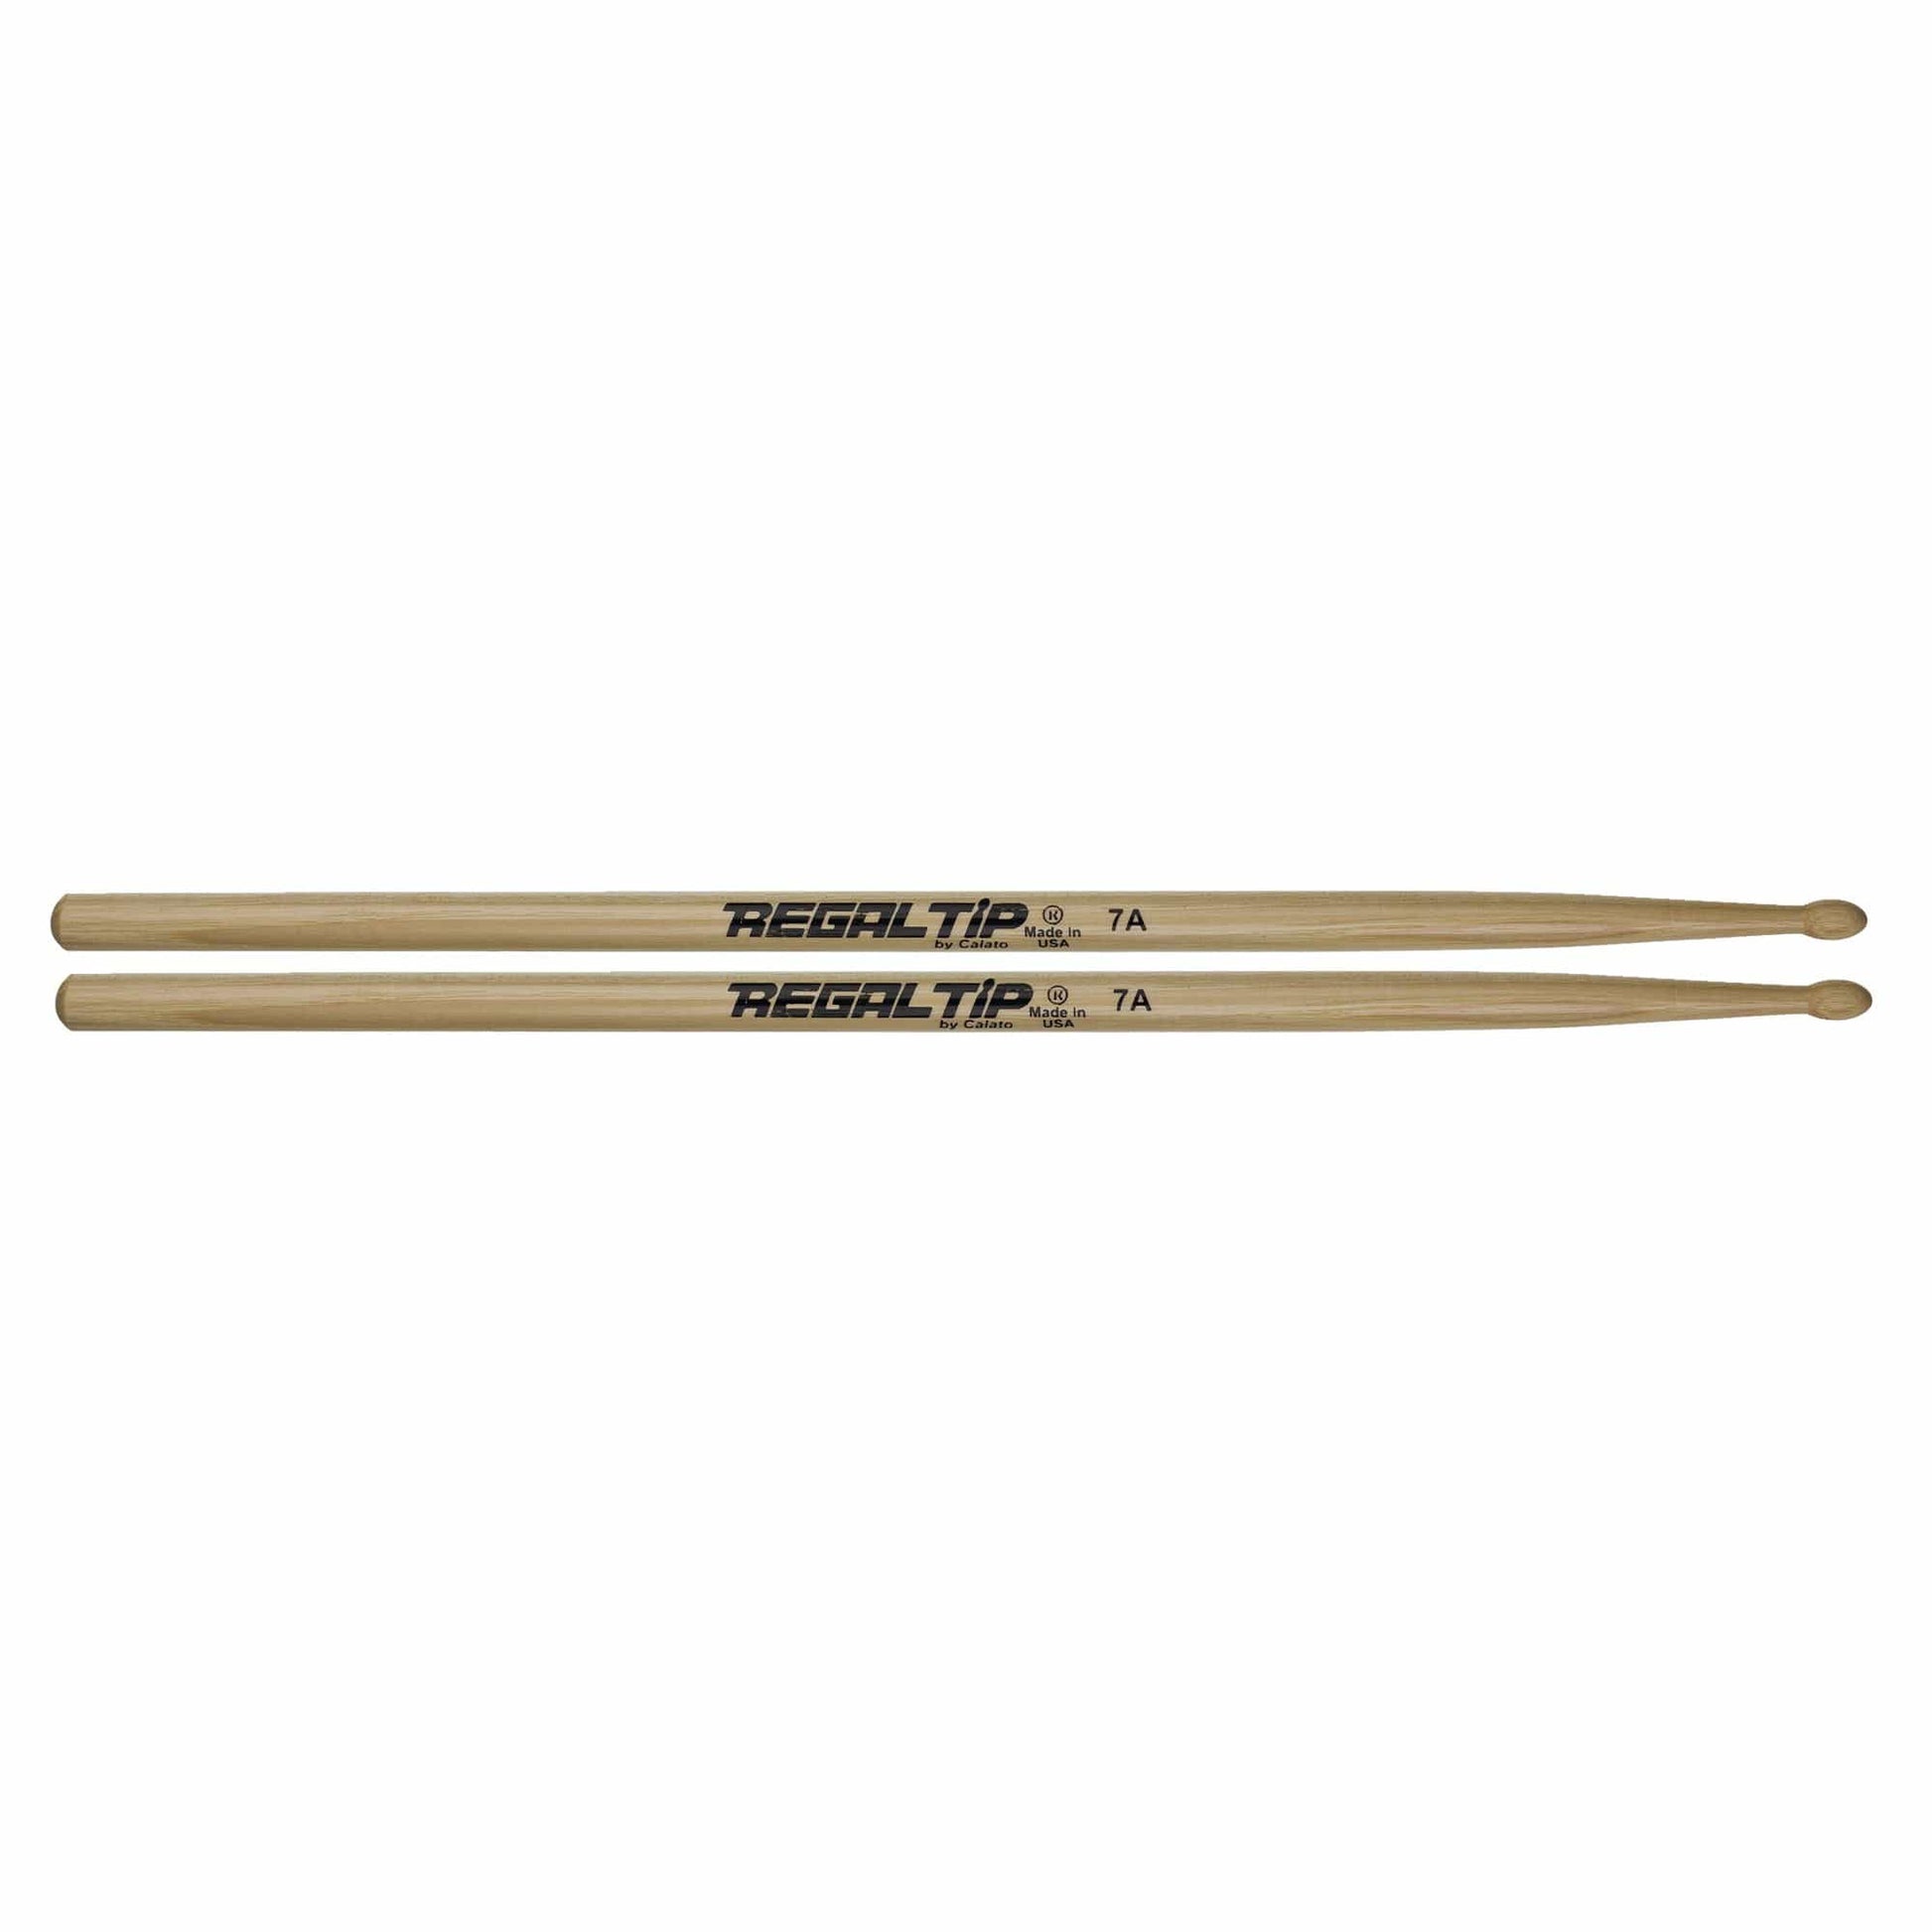 Regal Tip 7A Hickory Wood Tip Drum Sticks Drums and Percussion / Parts and Accessories / Drum Sticks and Mallets